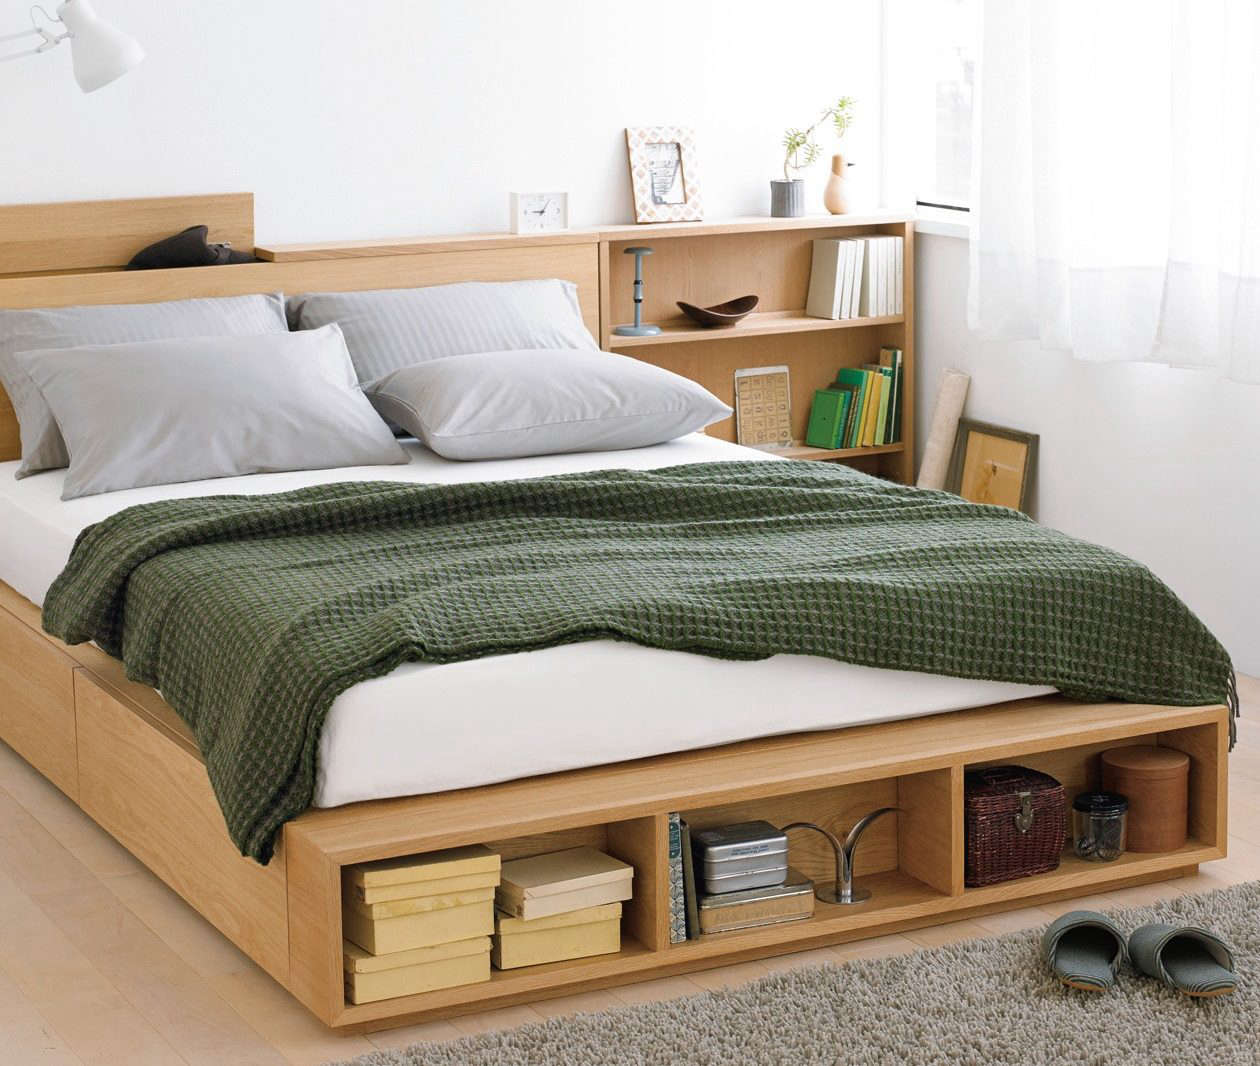 10 Easy Pieces Storage Beds Remodelista, What Is A Bed Frame With Drawers Called